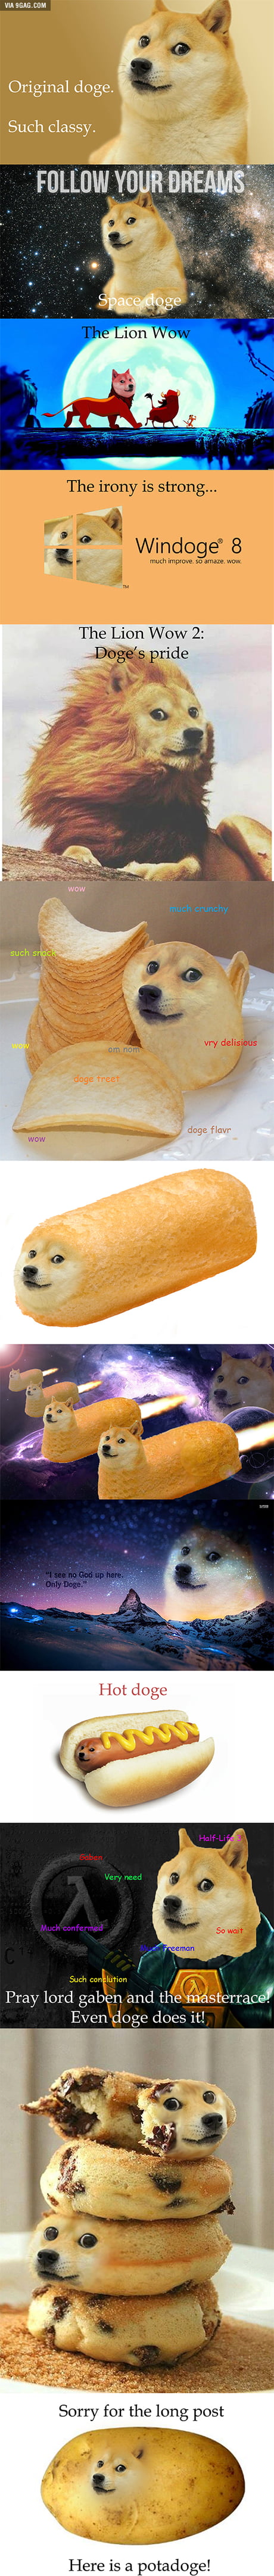 Doge At Its Finest 9gag